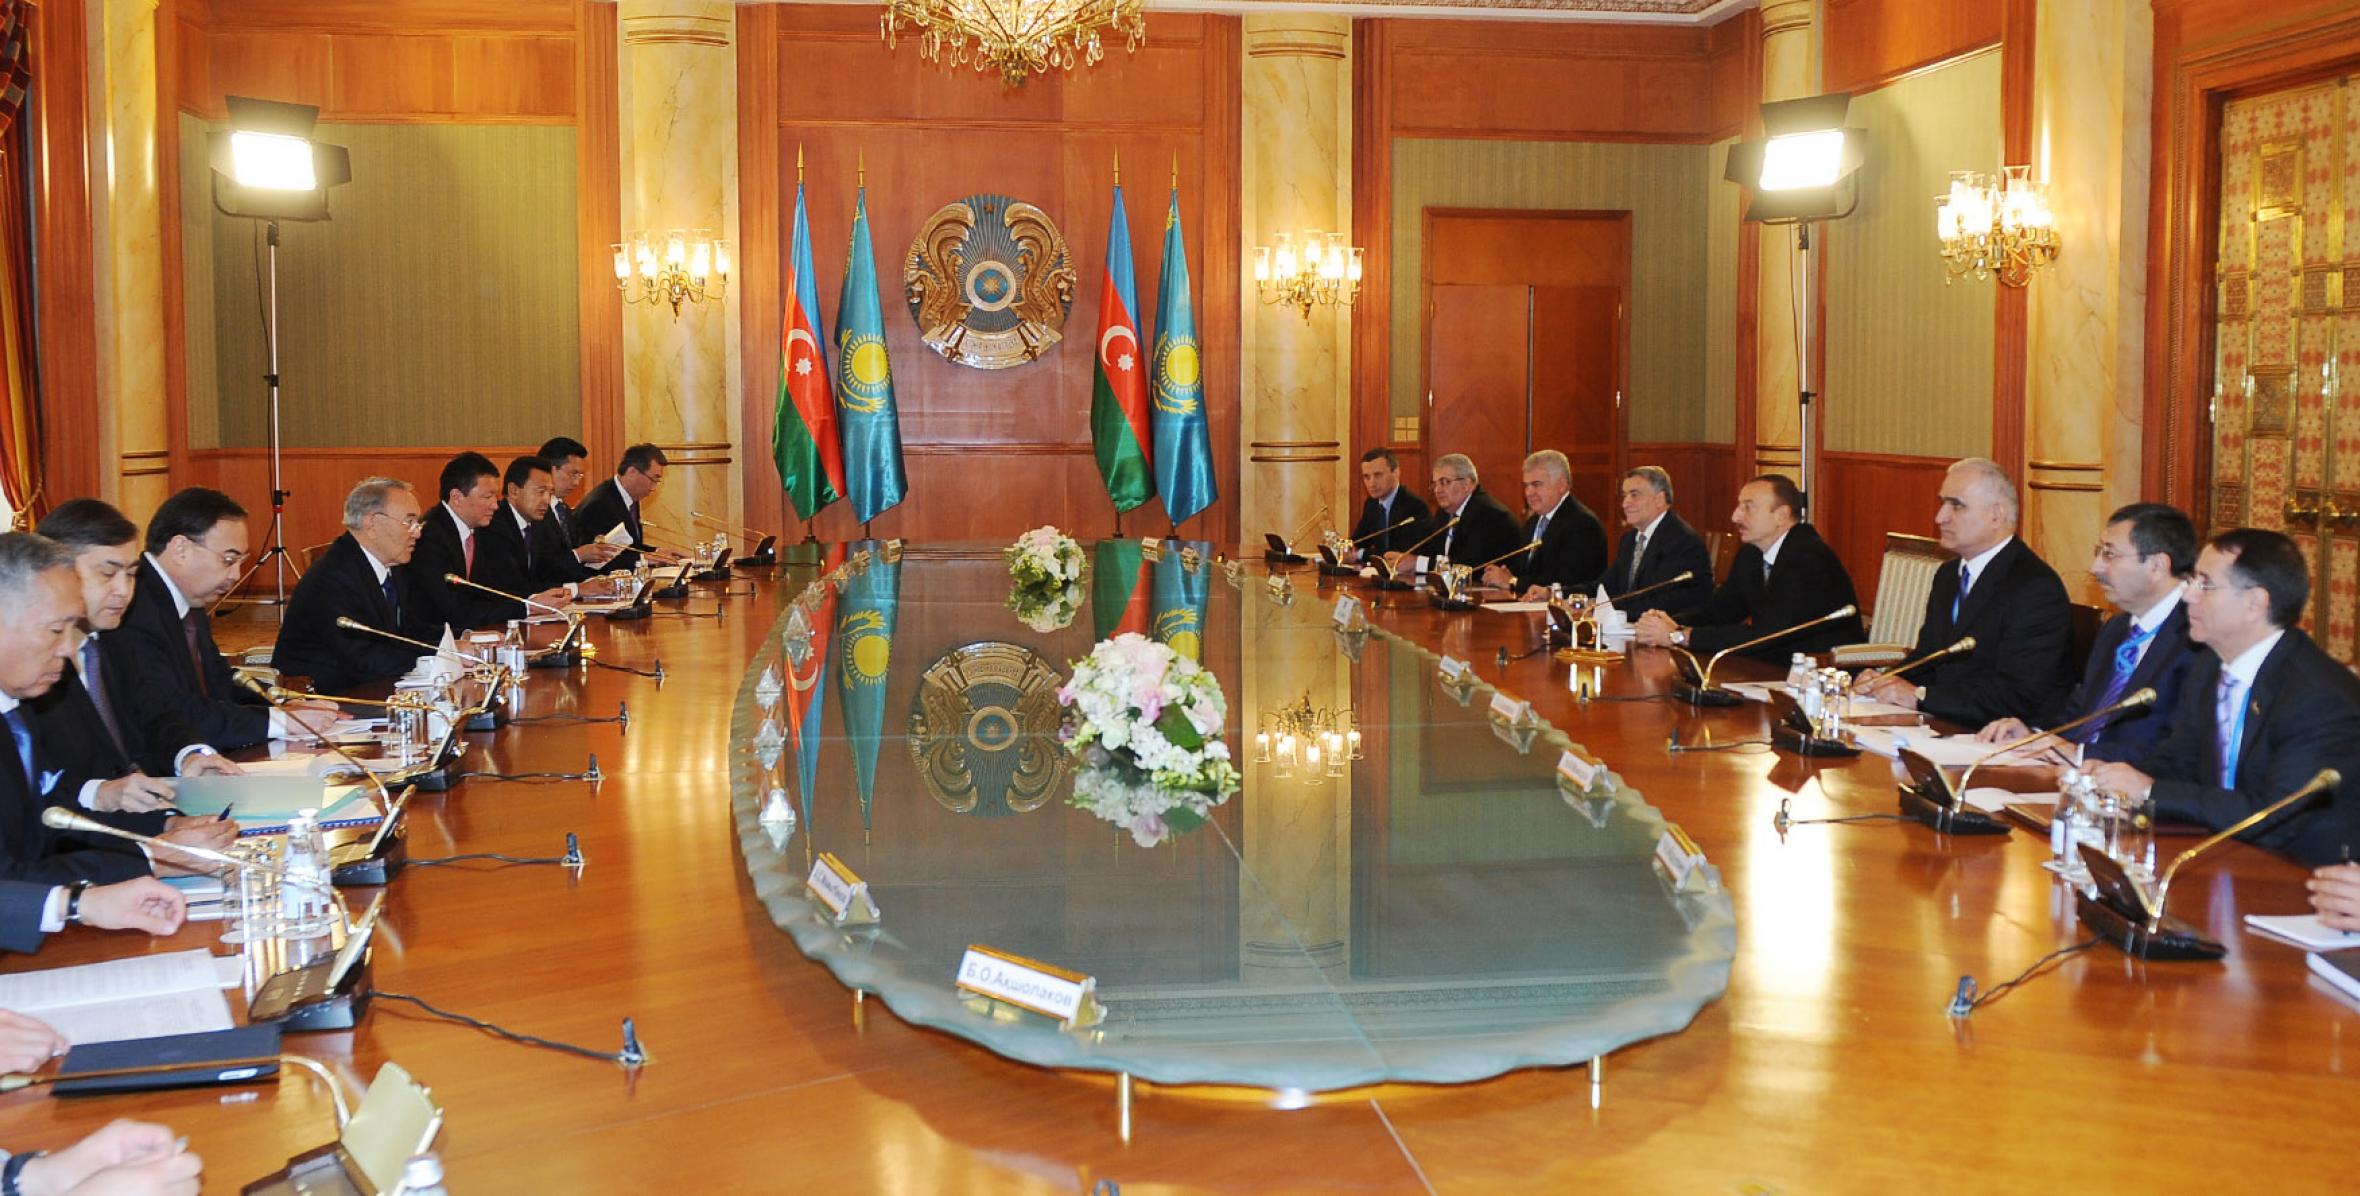 Ilham Aliyev and Nursultan Nazarbayev held negotiations in an expanded format with the participation of delegations